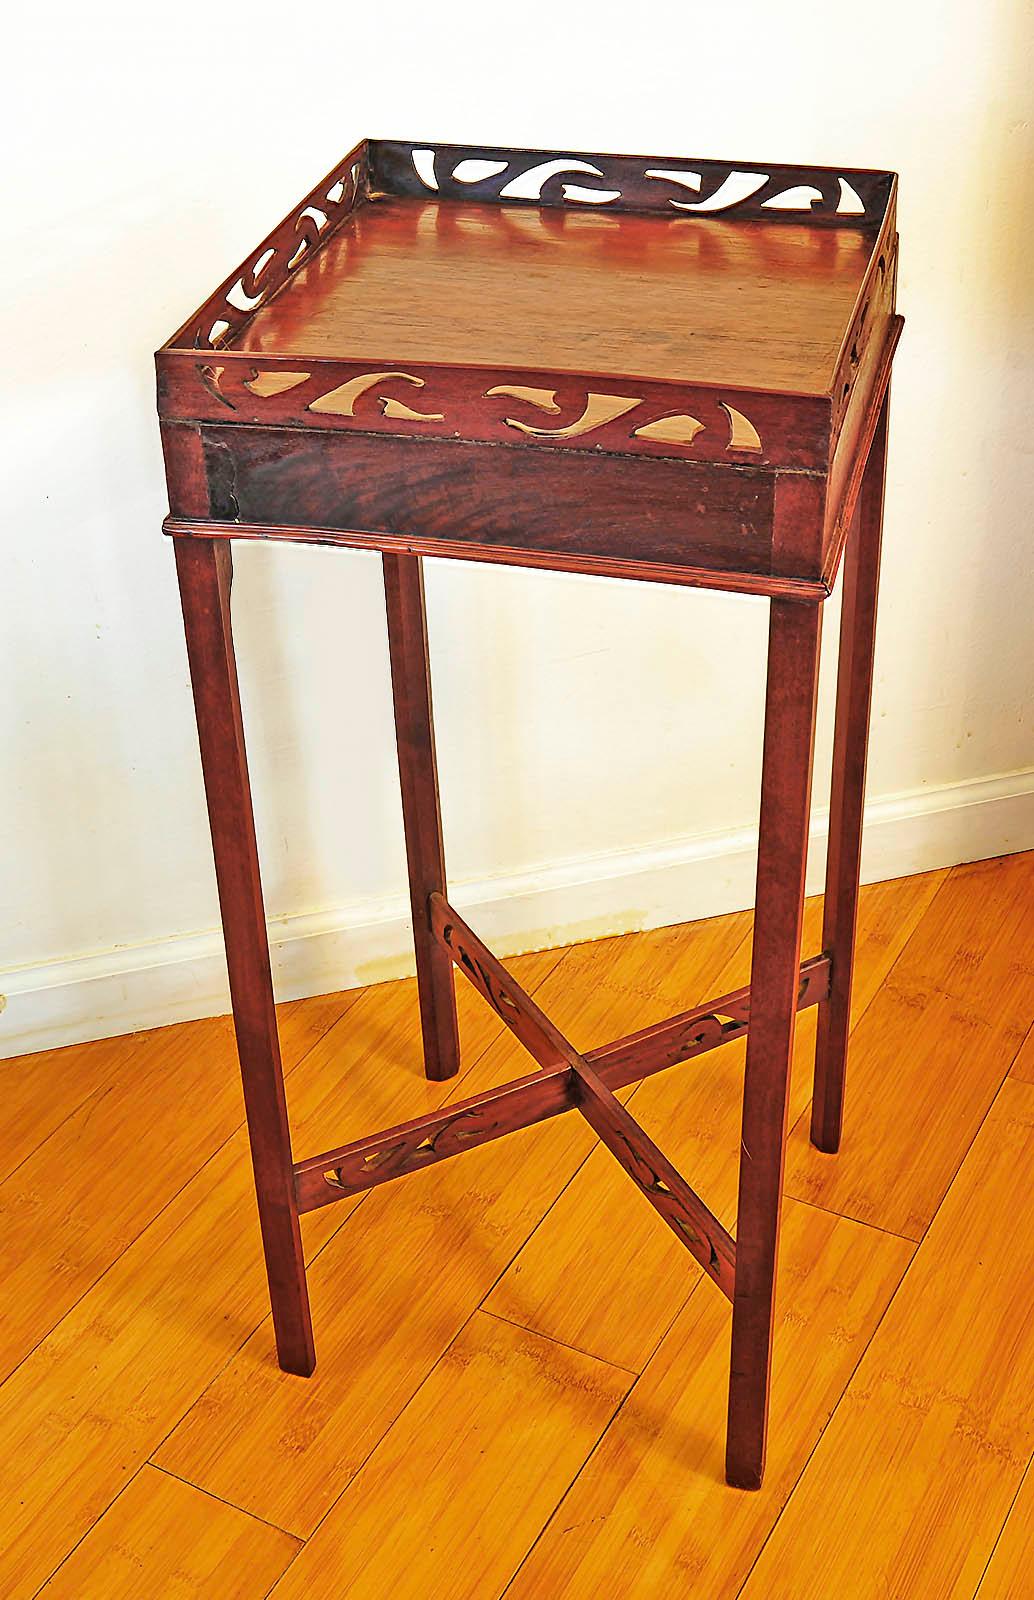 Late 18th Century 18th Century Antique English Chippendale Mahogany Urn Candle Stand Table For Sale